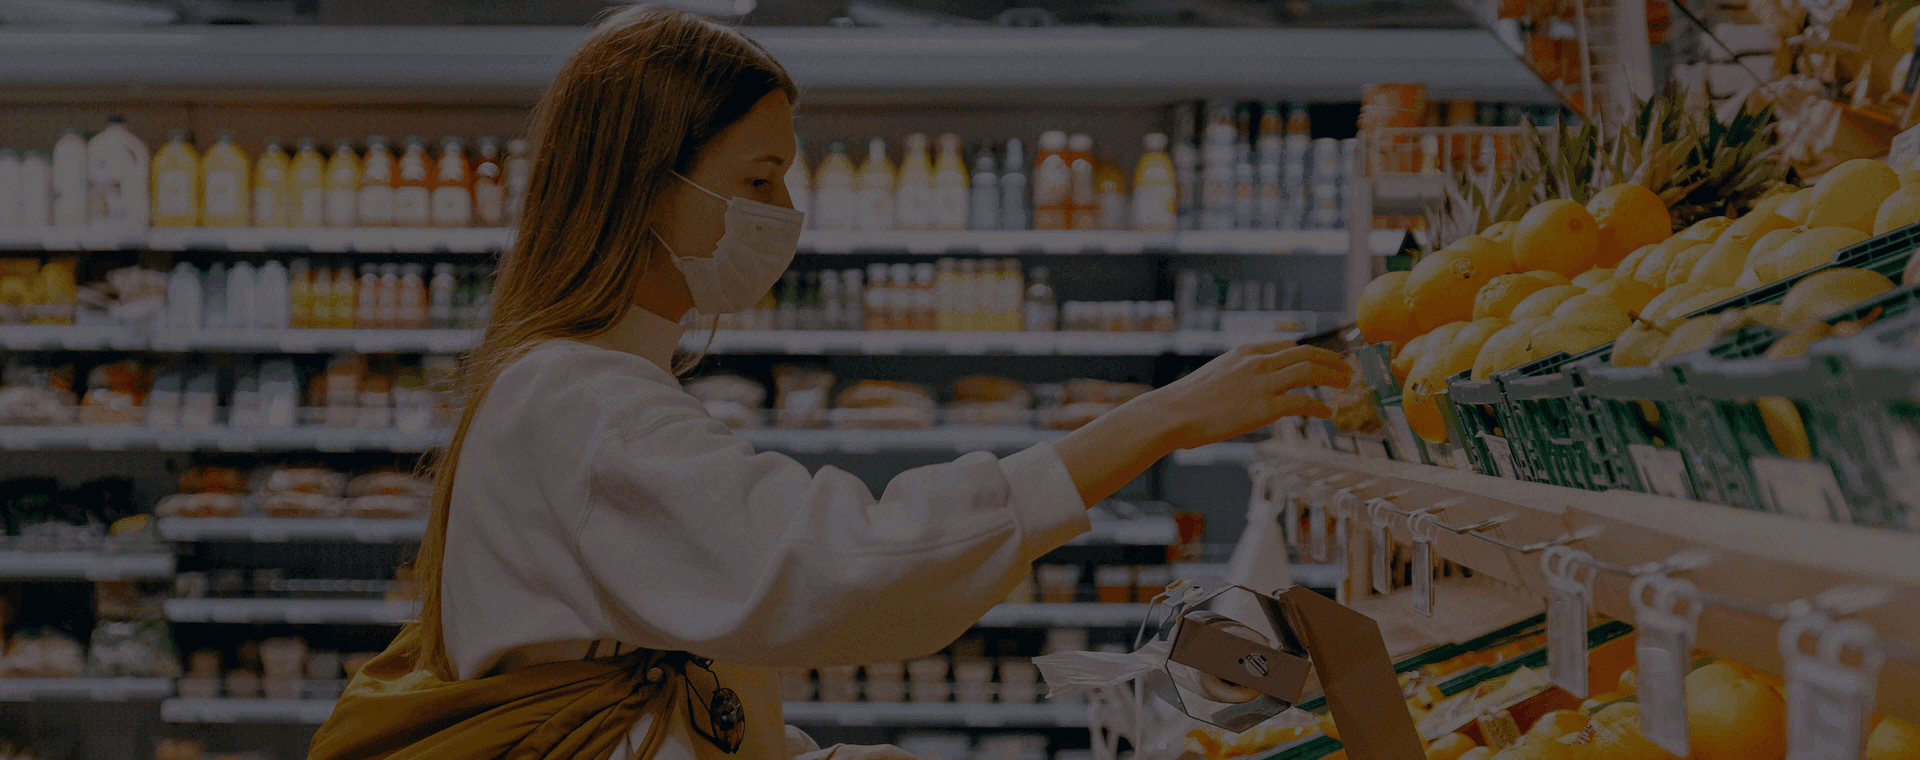 The Benefits of AI Video Analytics
for Retail Businesses